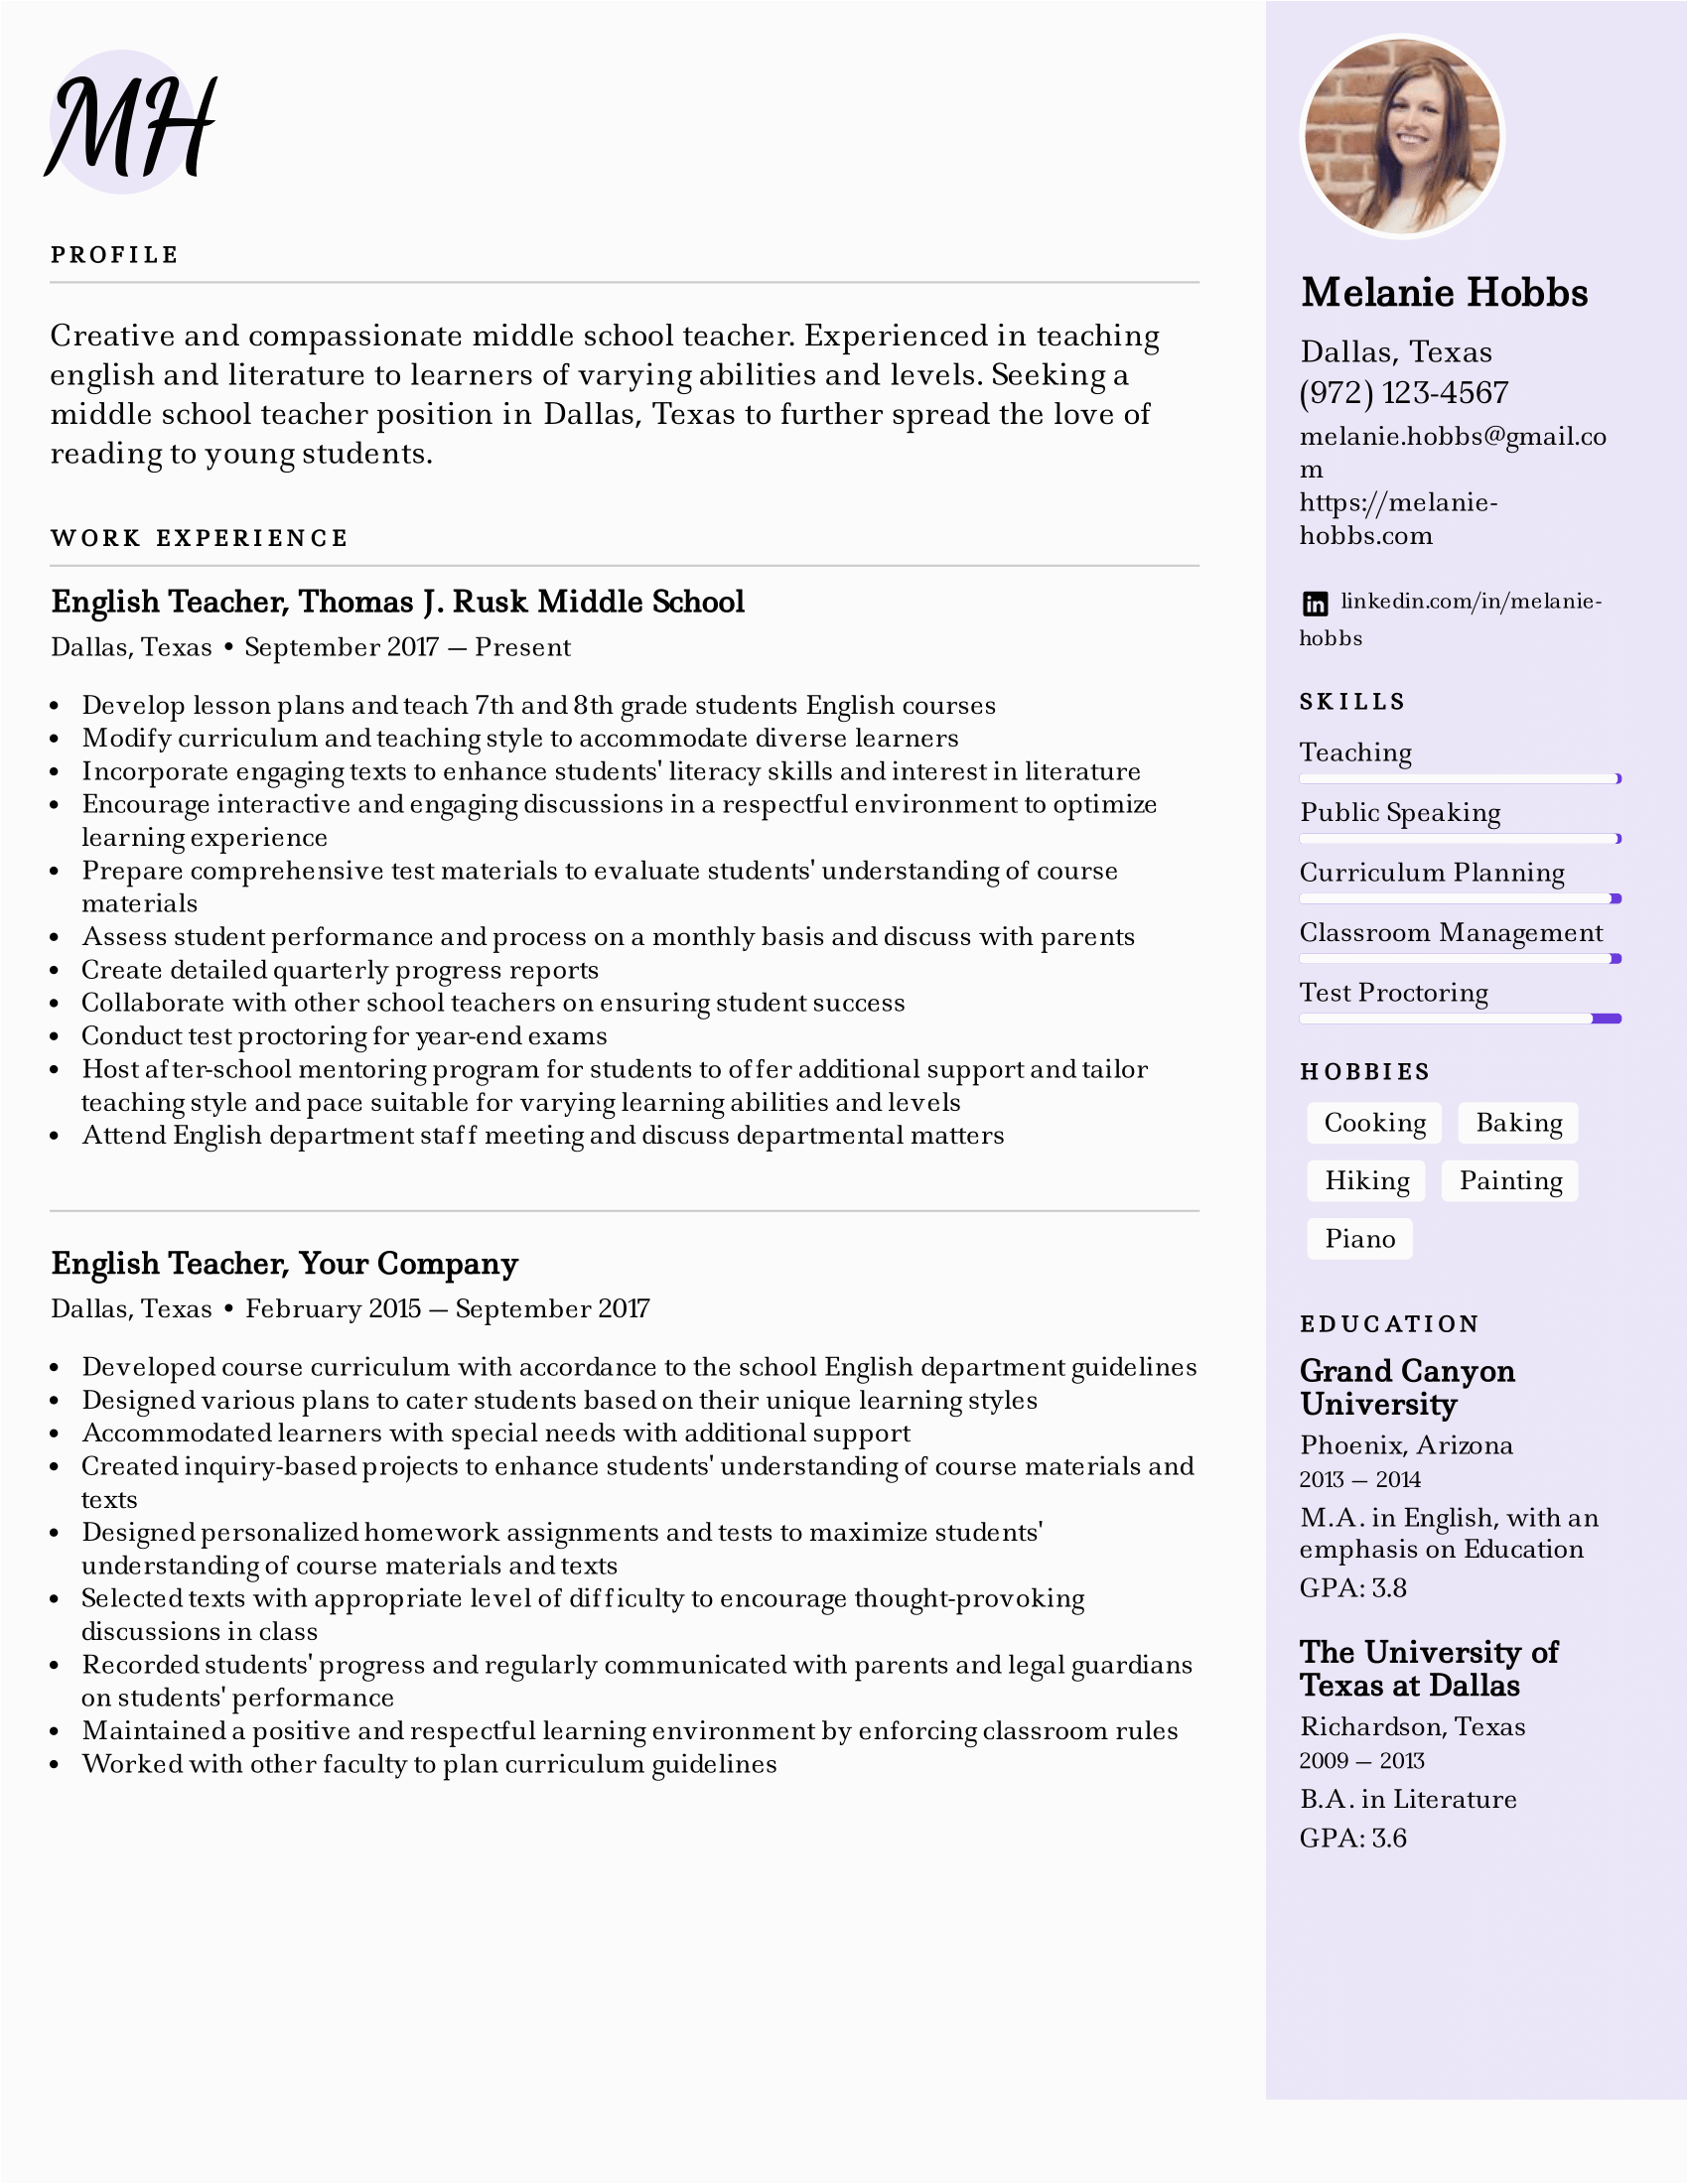 Sample Resume for Middle School Students Middle School Teacher Resume Example & Writing Tips for 2021